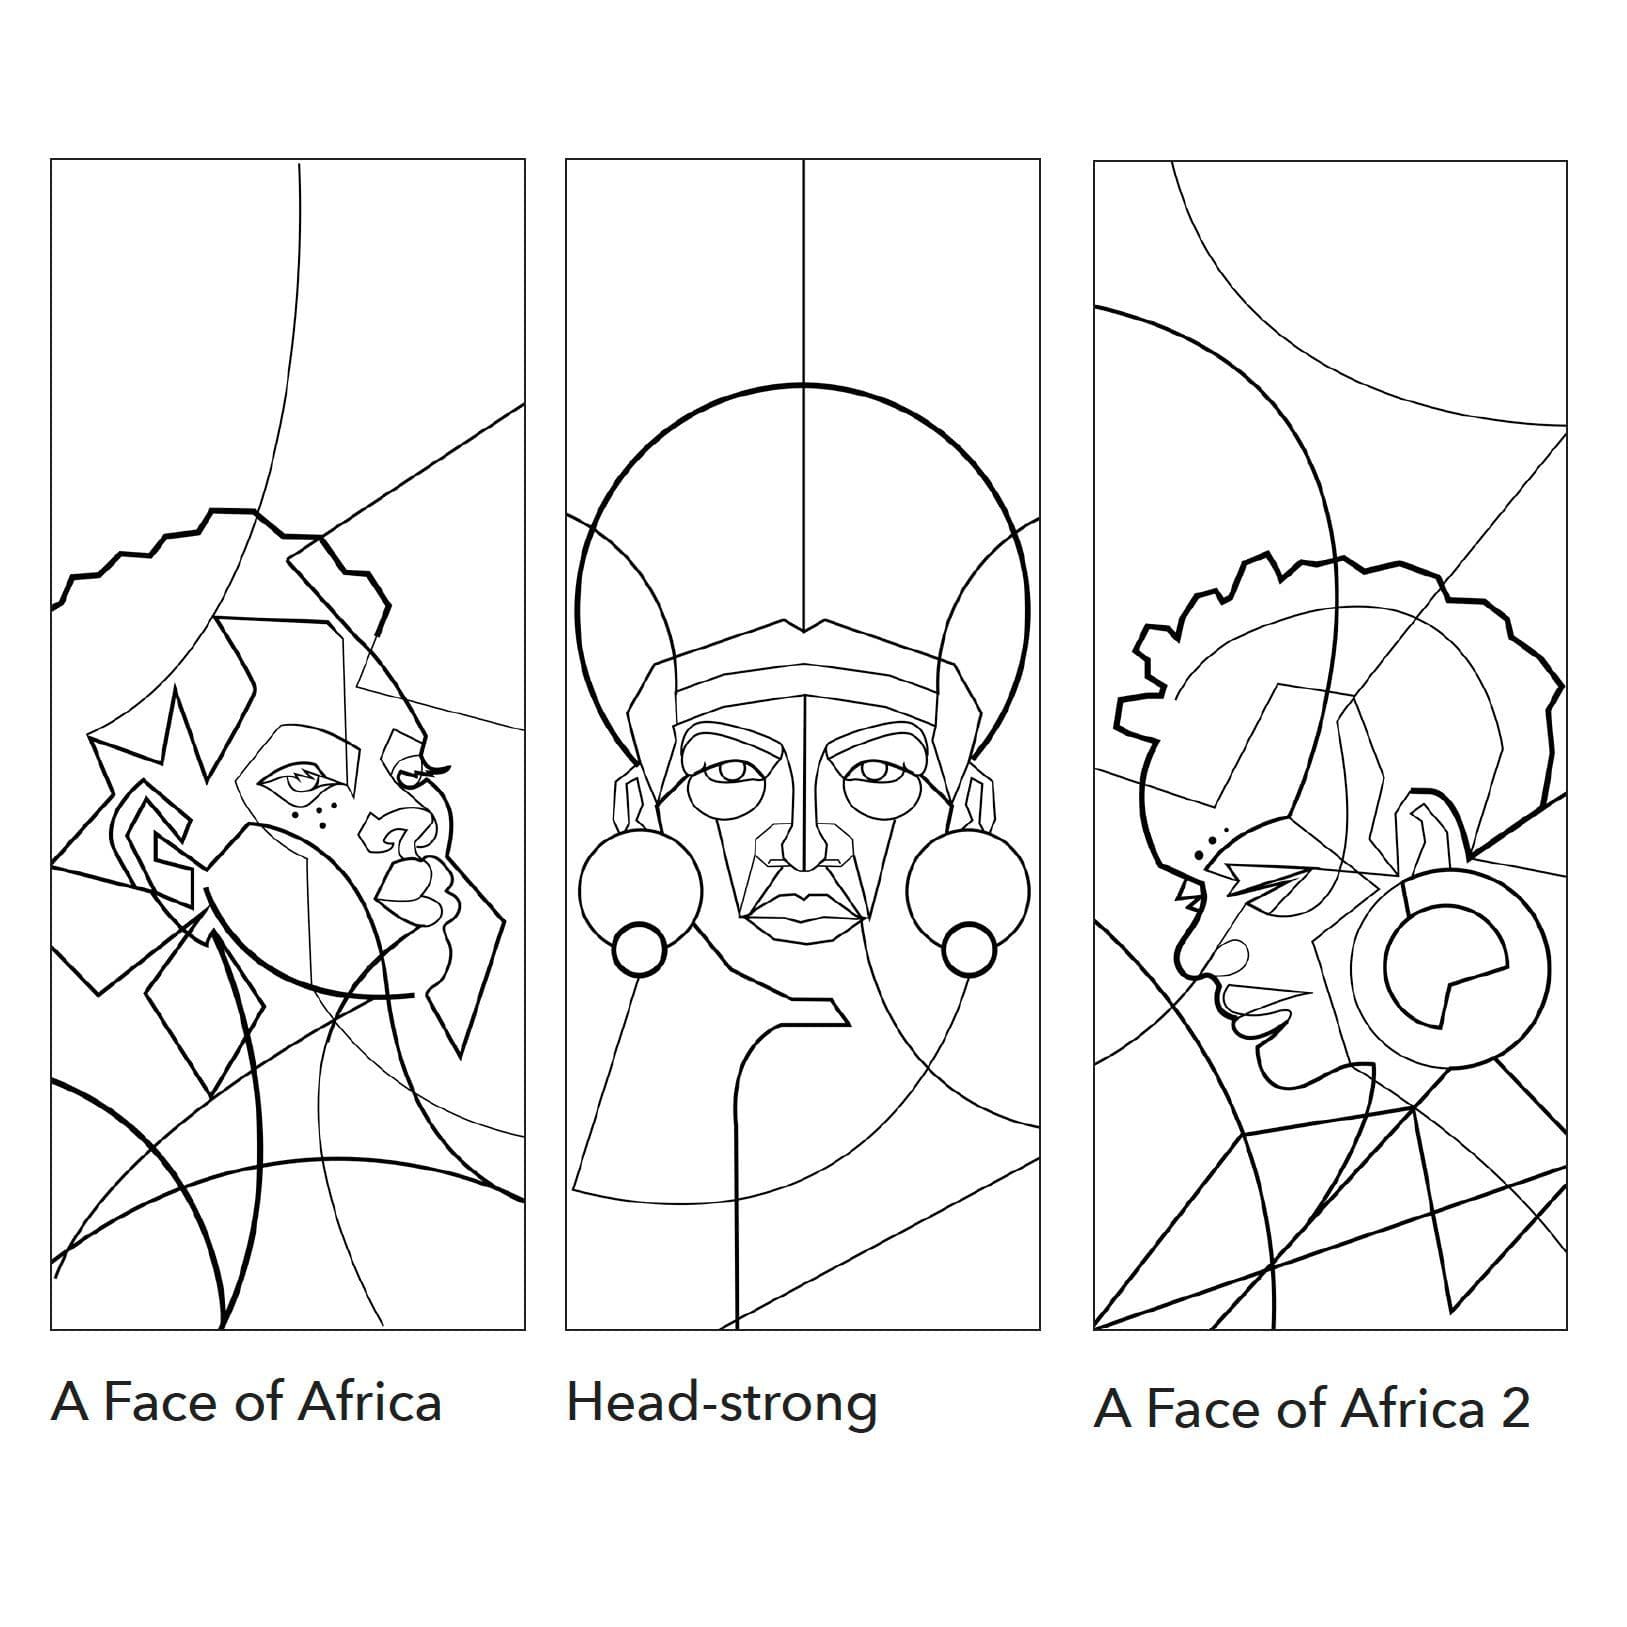 A Face of Africa